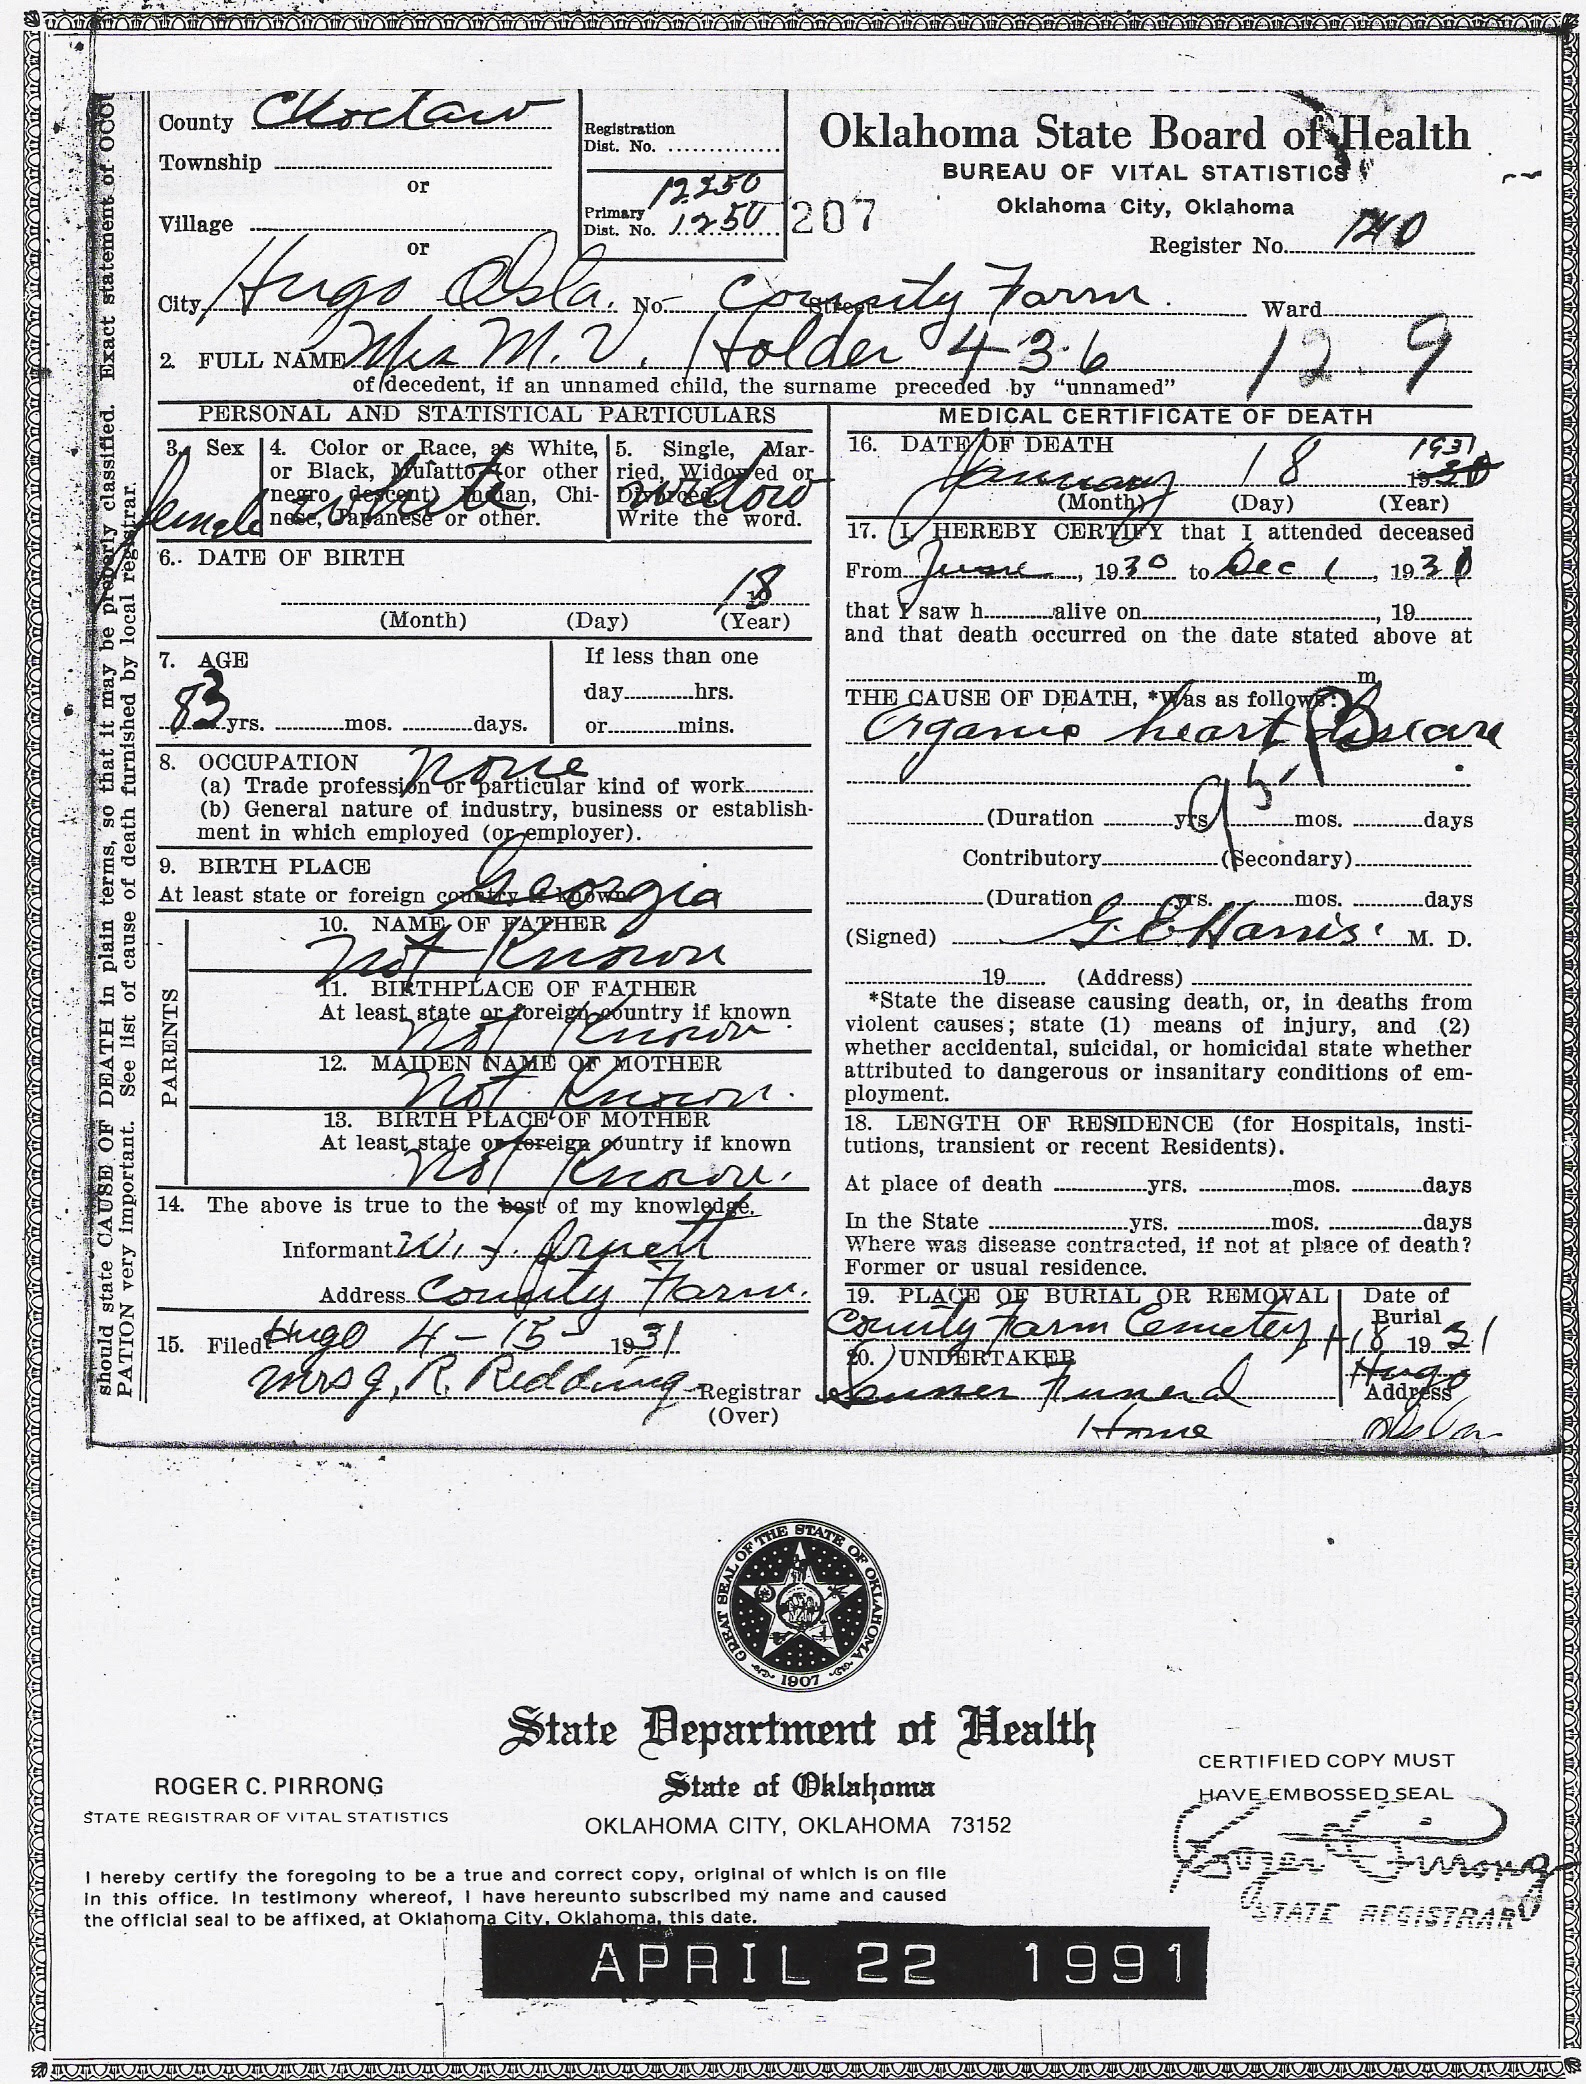 How To Get A Birth Certificate In Oklahoma